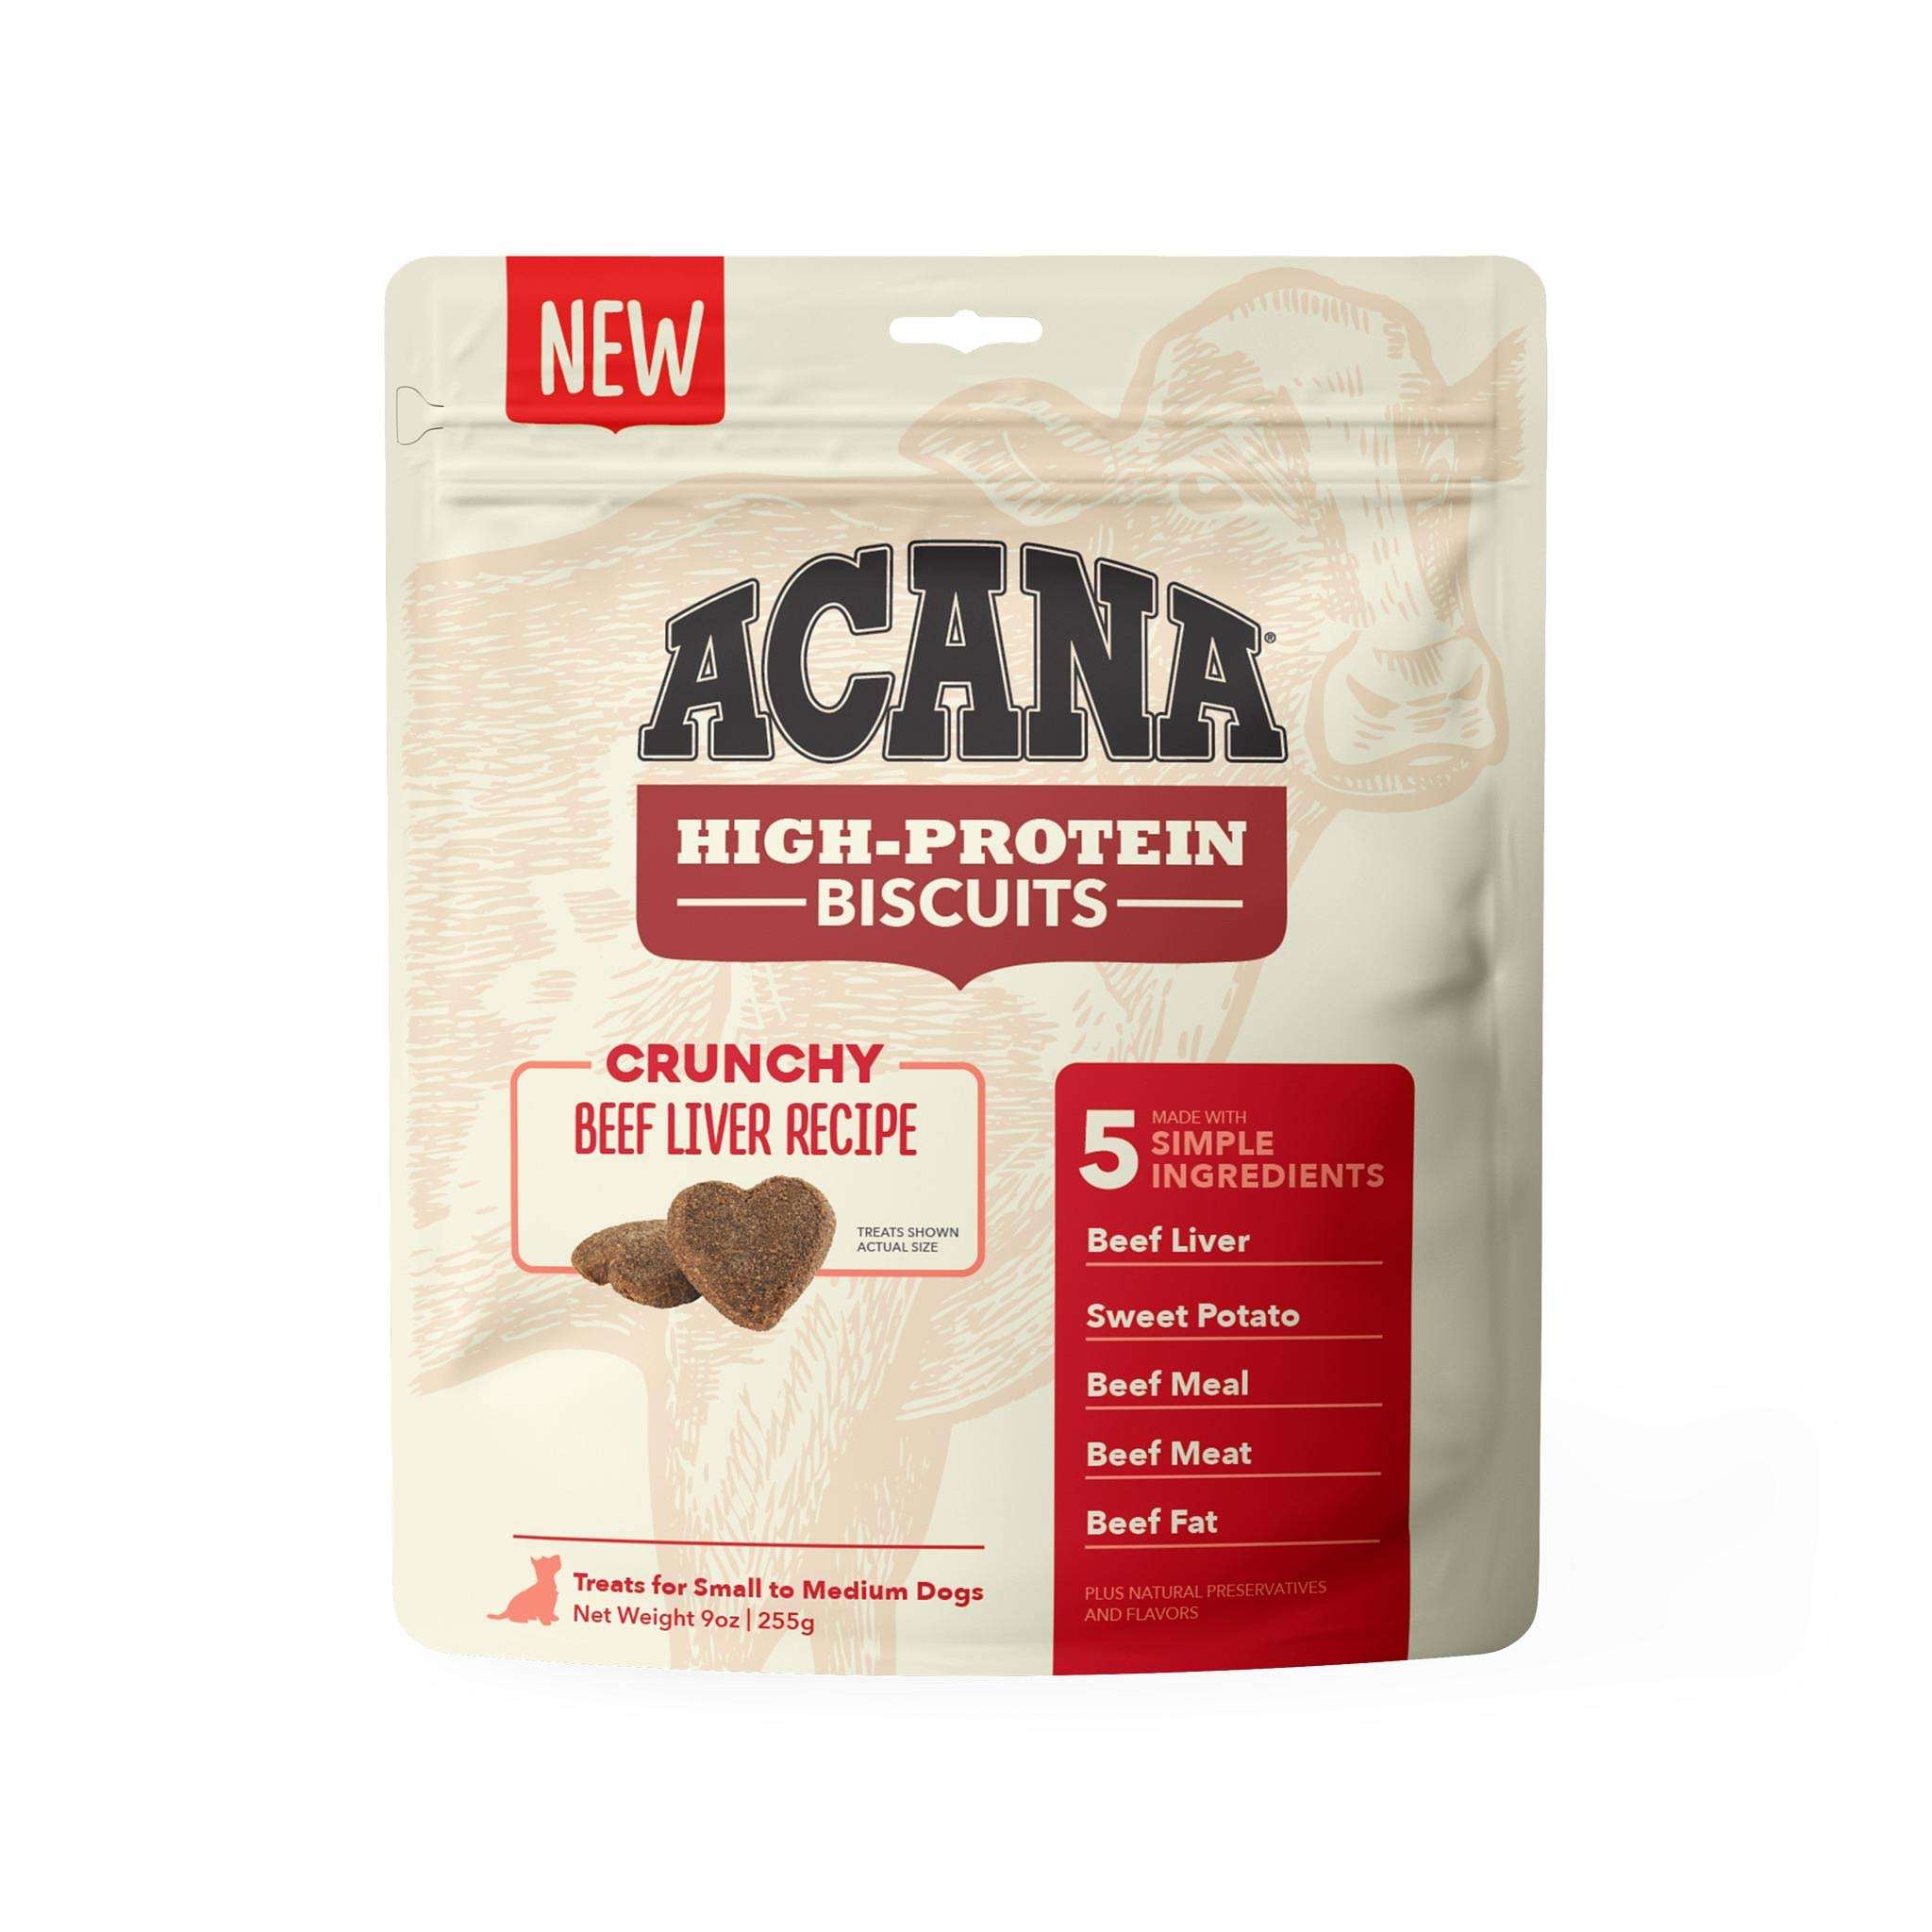 Acana High-Protein Crunchy Beef Liver Recipe Small Dog Biscuits 9 oz